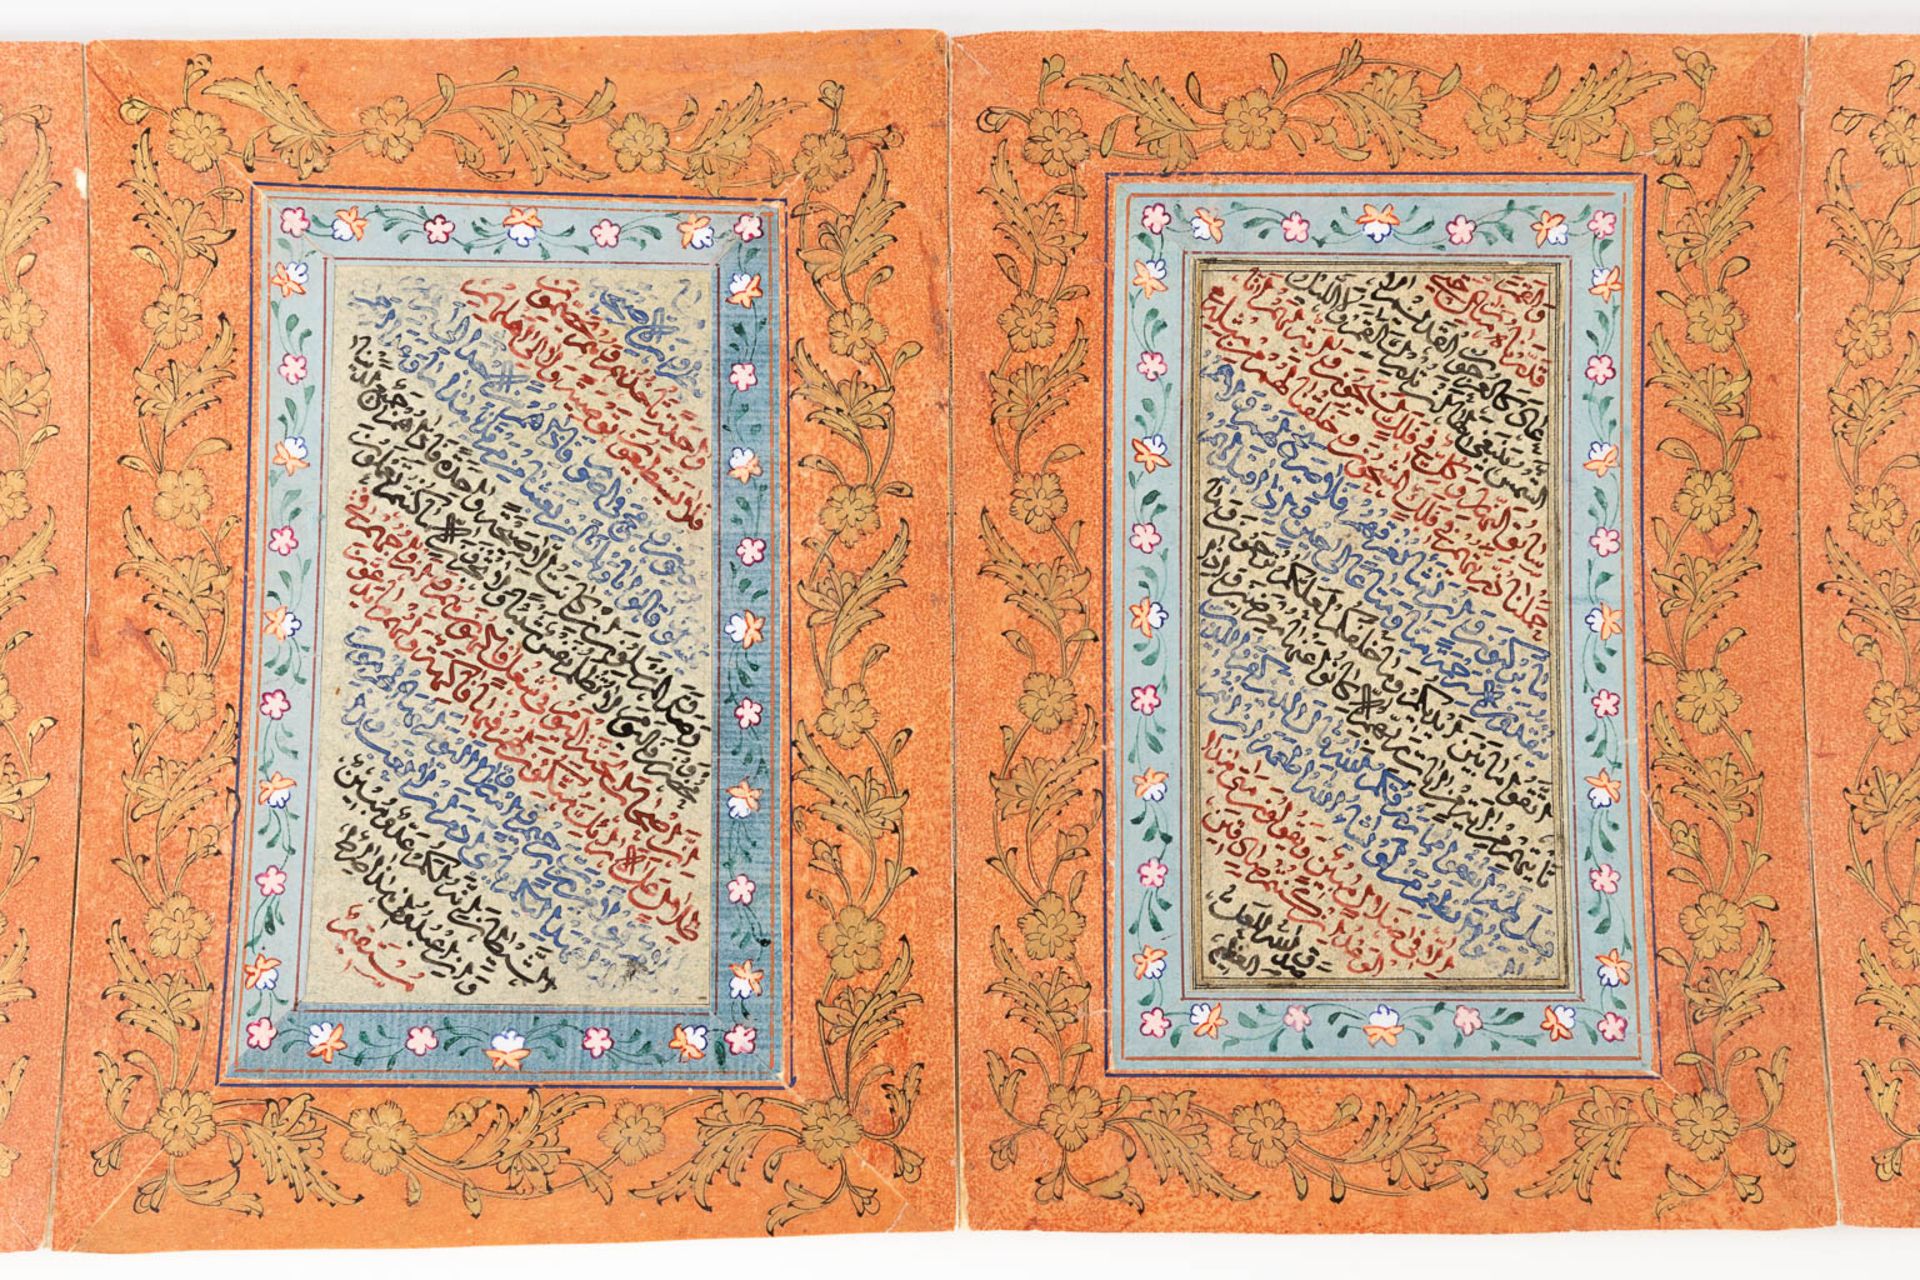 An album of Ottoman Calligraphic Panels (QITA) early 20th C. (W:15 x H:20 cm) - Image 5 of 12